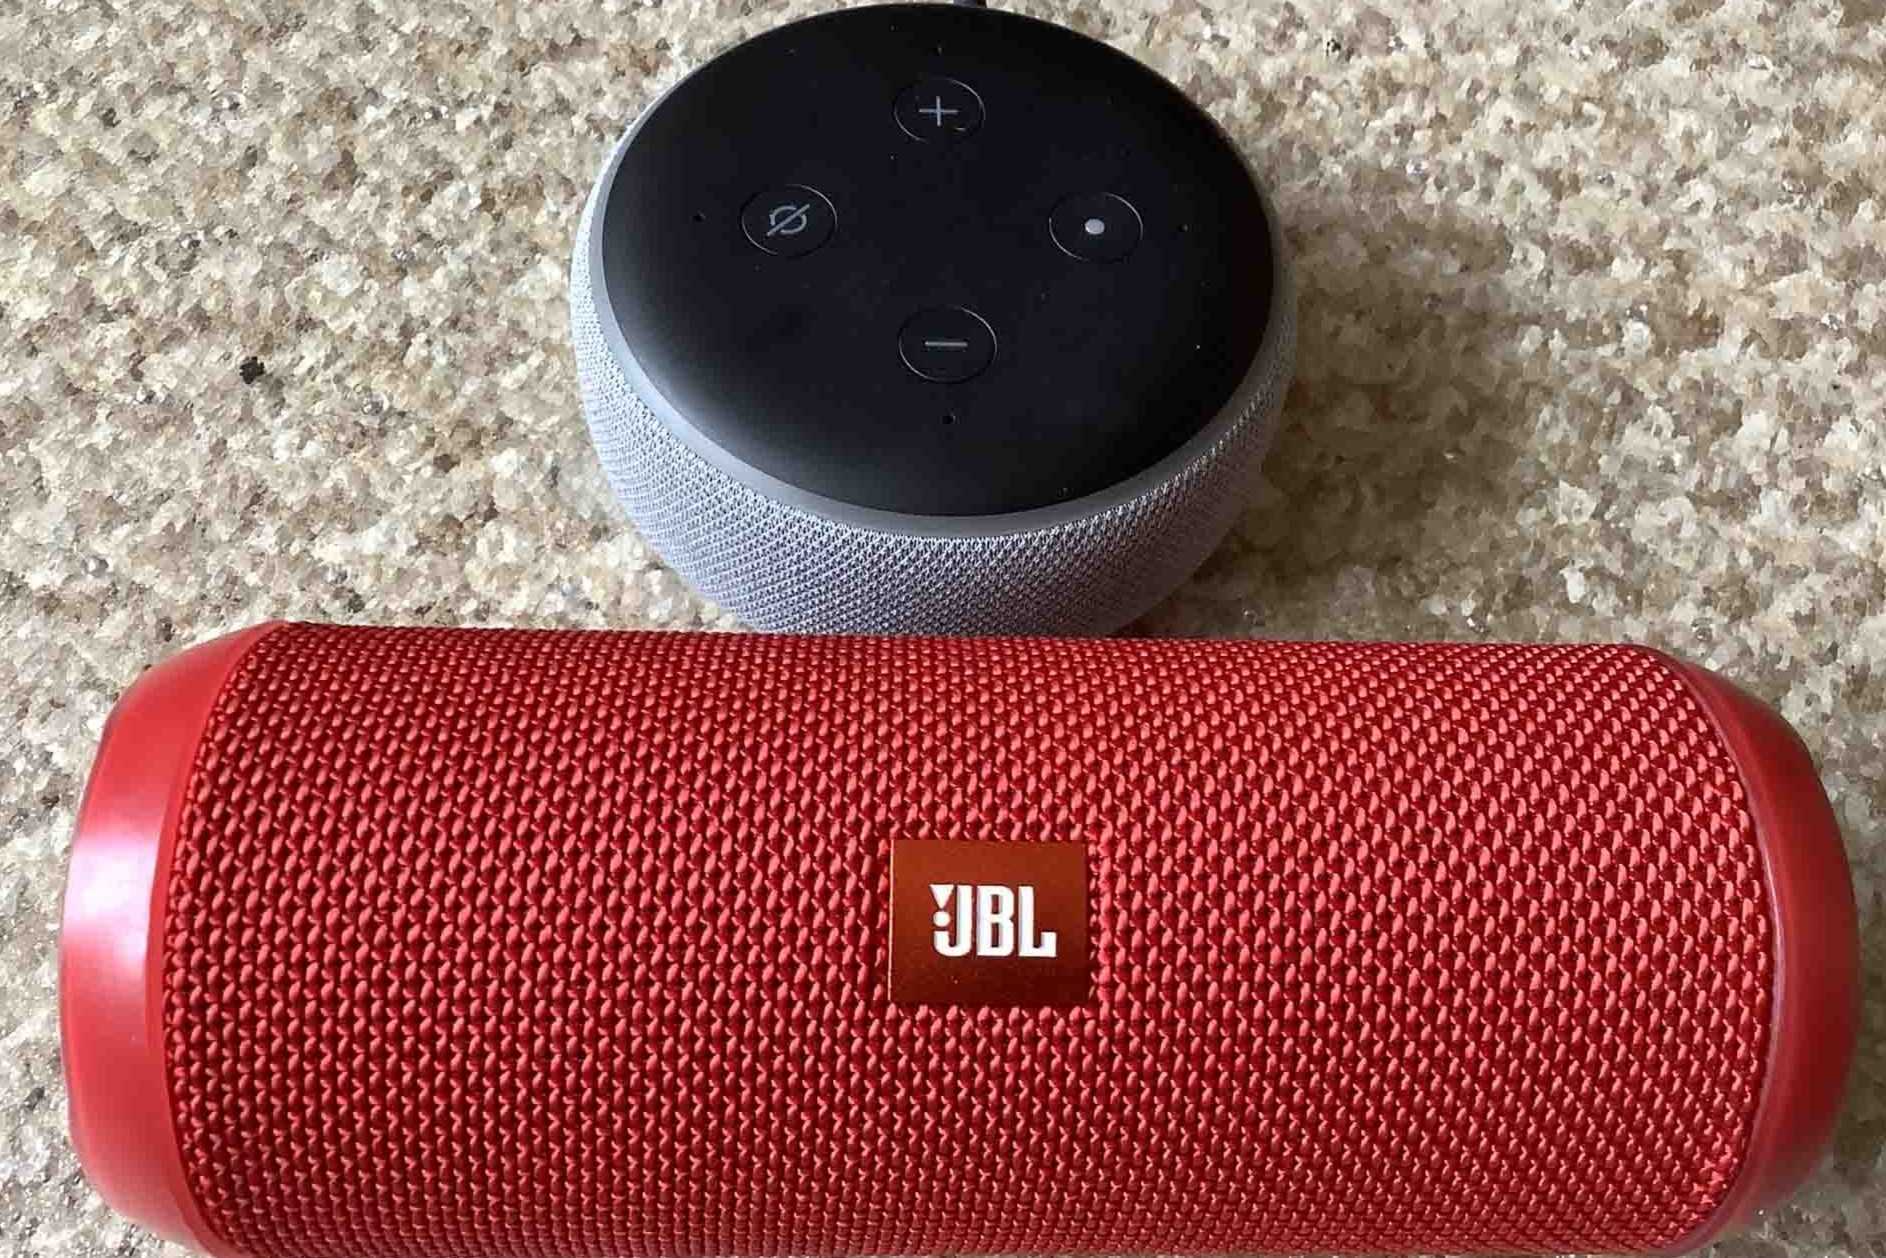 How To Pair Amazon Echo With JBL